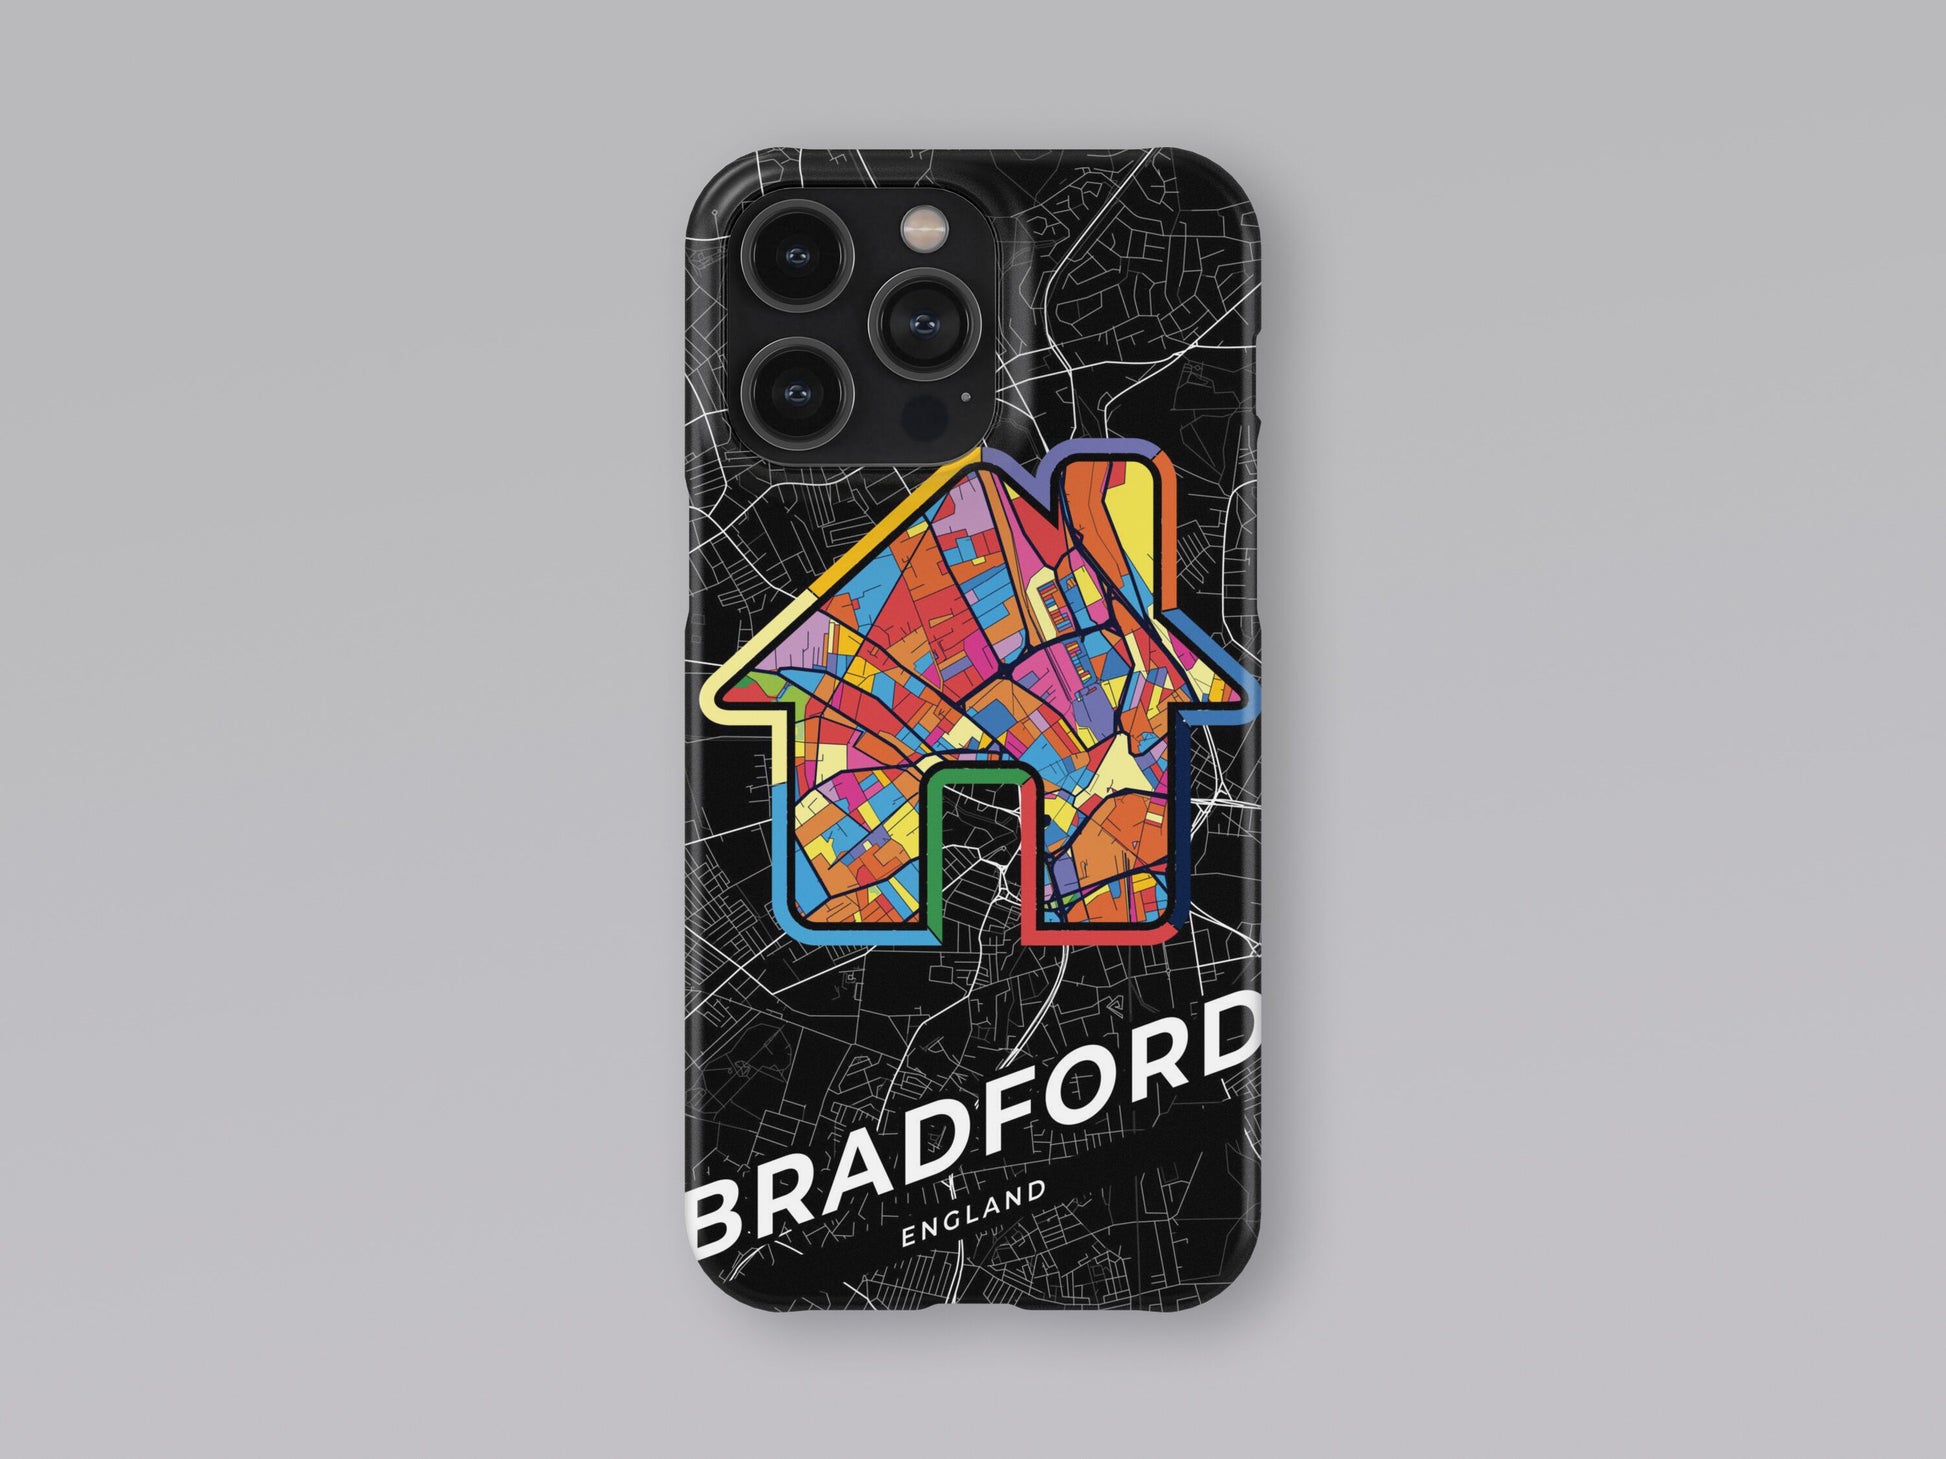 Bradford England slim phone case with colorful icon. Birthday, wedding or housewarming gift. Couple match cases. 3